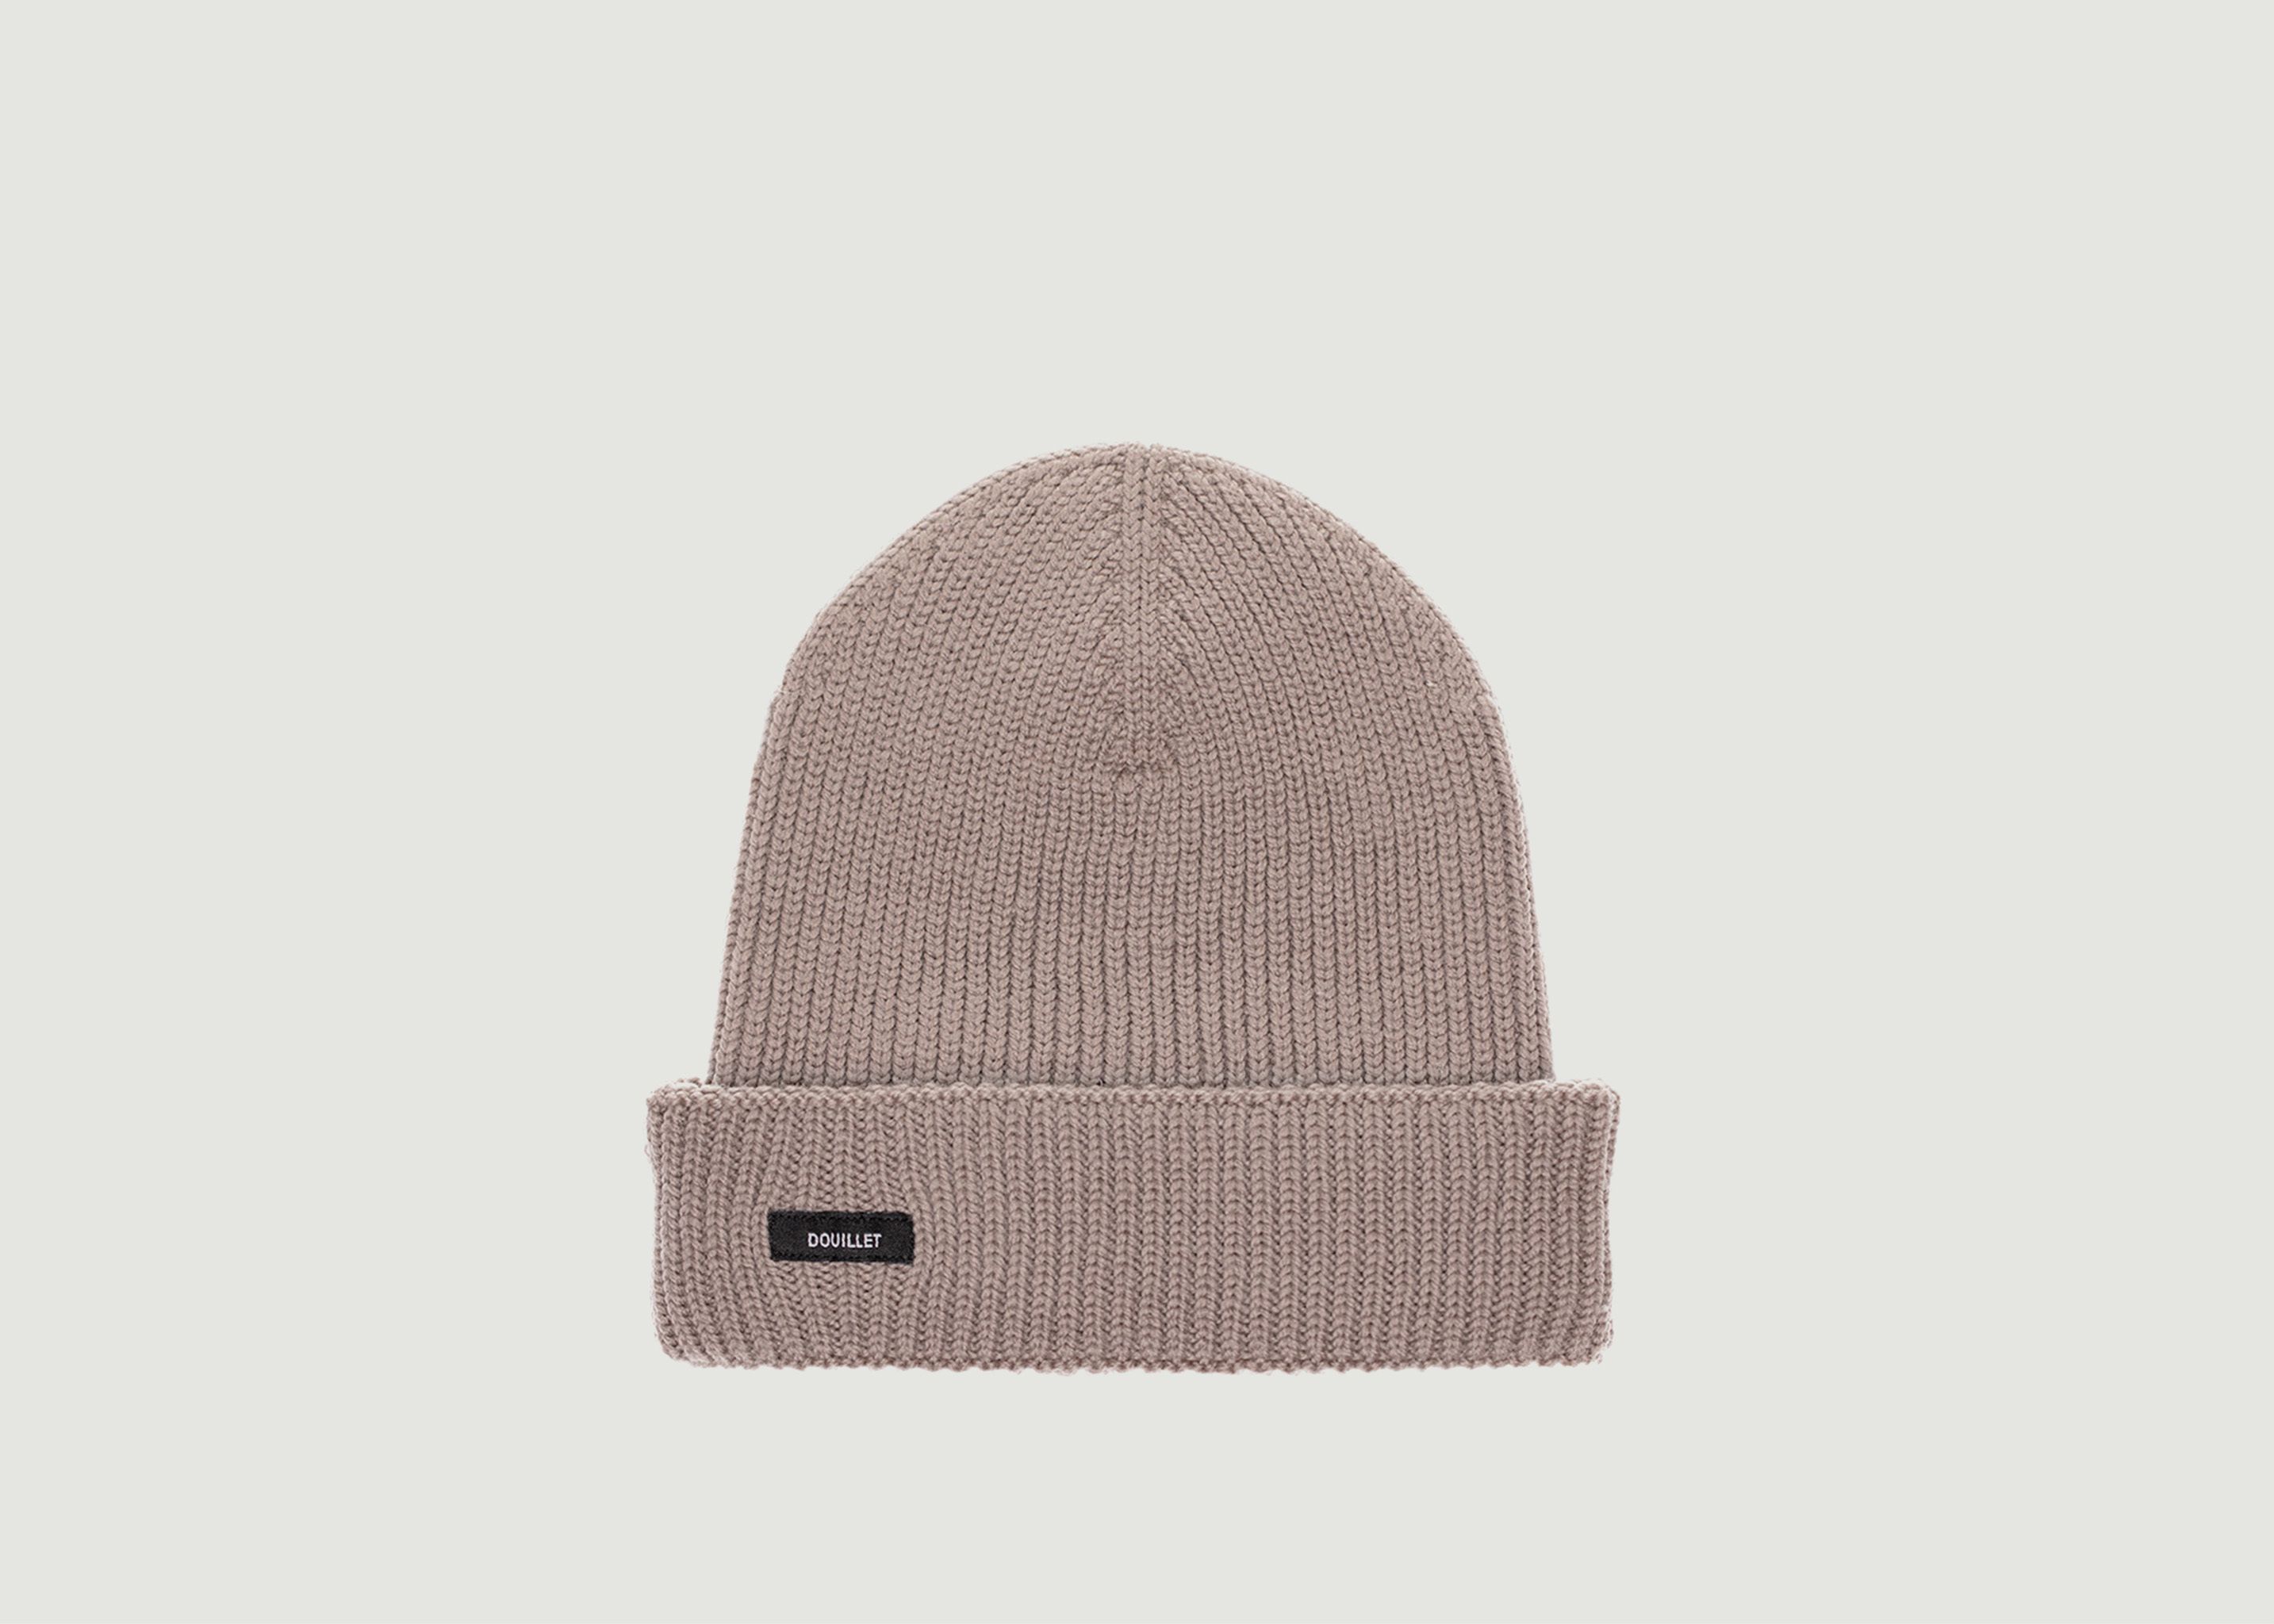 Taupe hat - Douillet